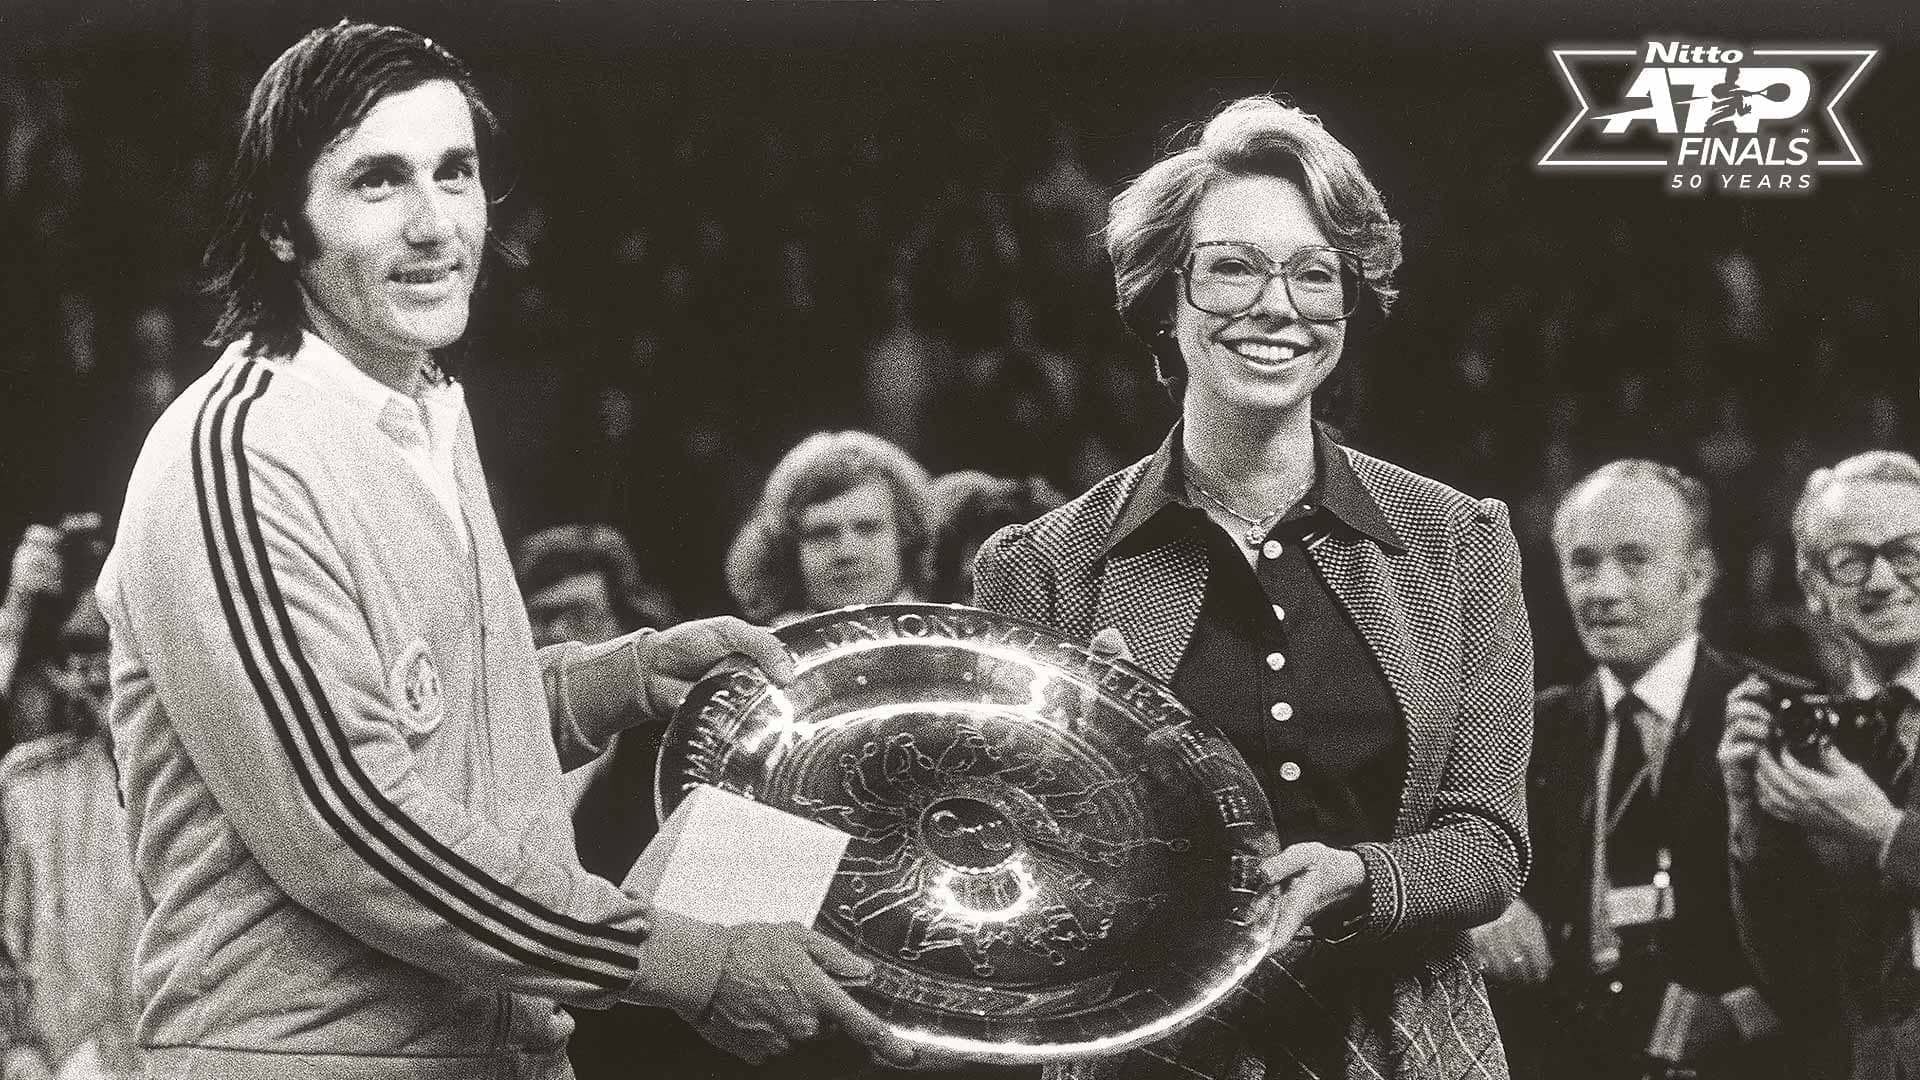 Ilie Nastase is presented with his fourth Masters trophy by Sweden's Princess Christina in Stockholm, 1975.